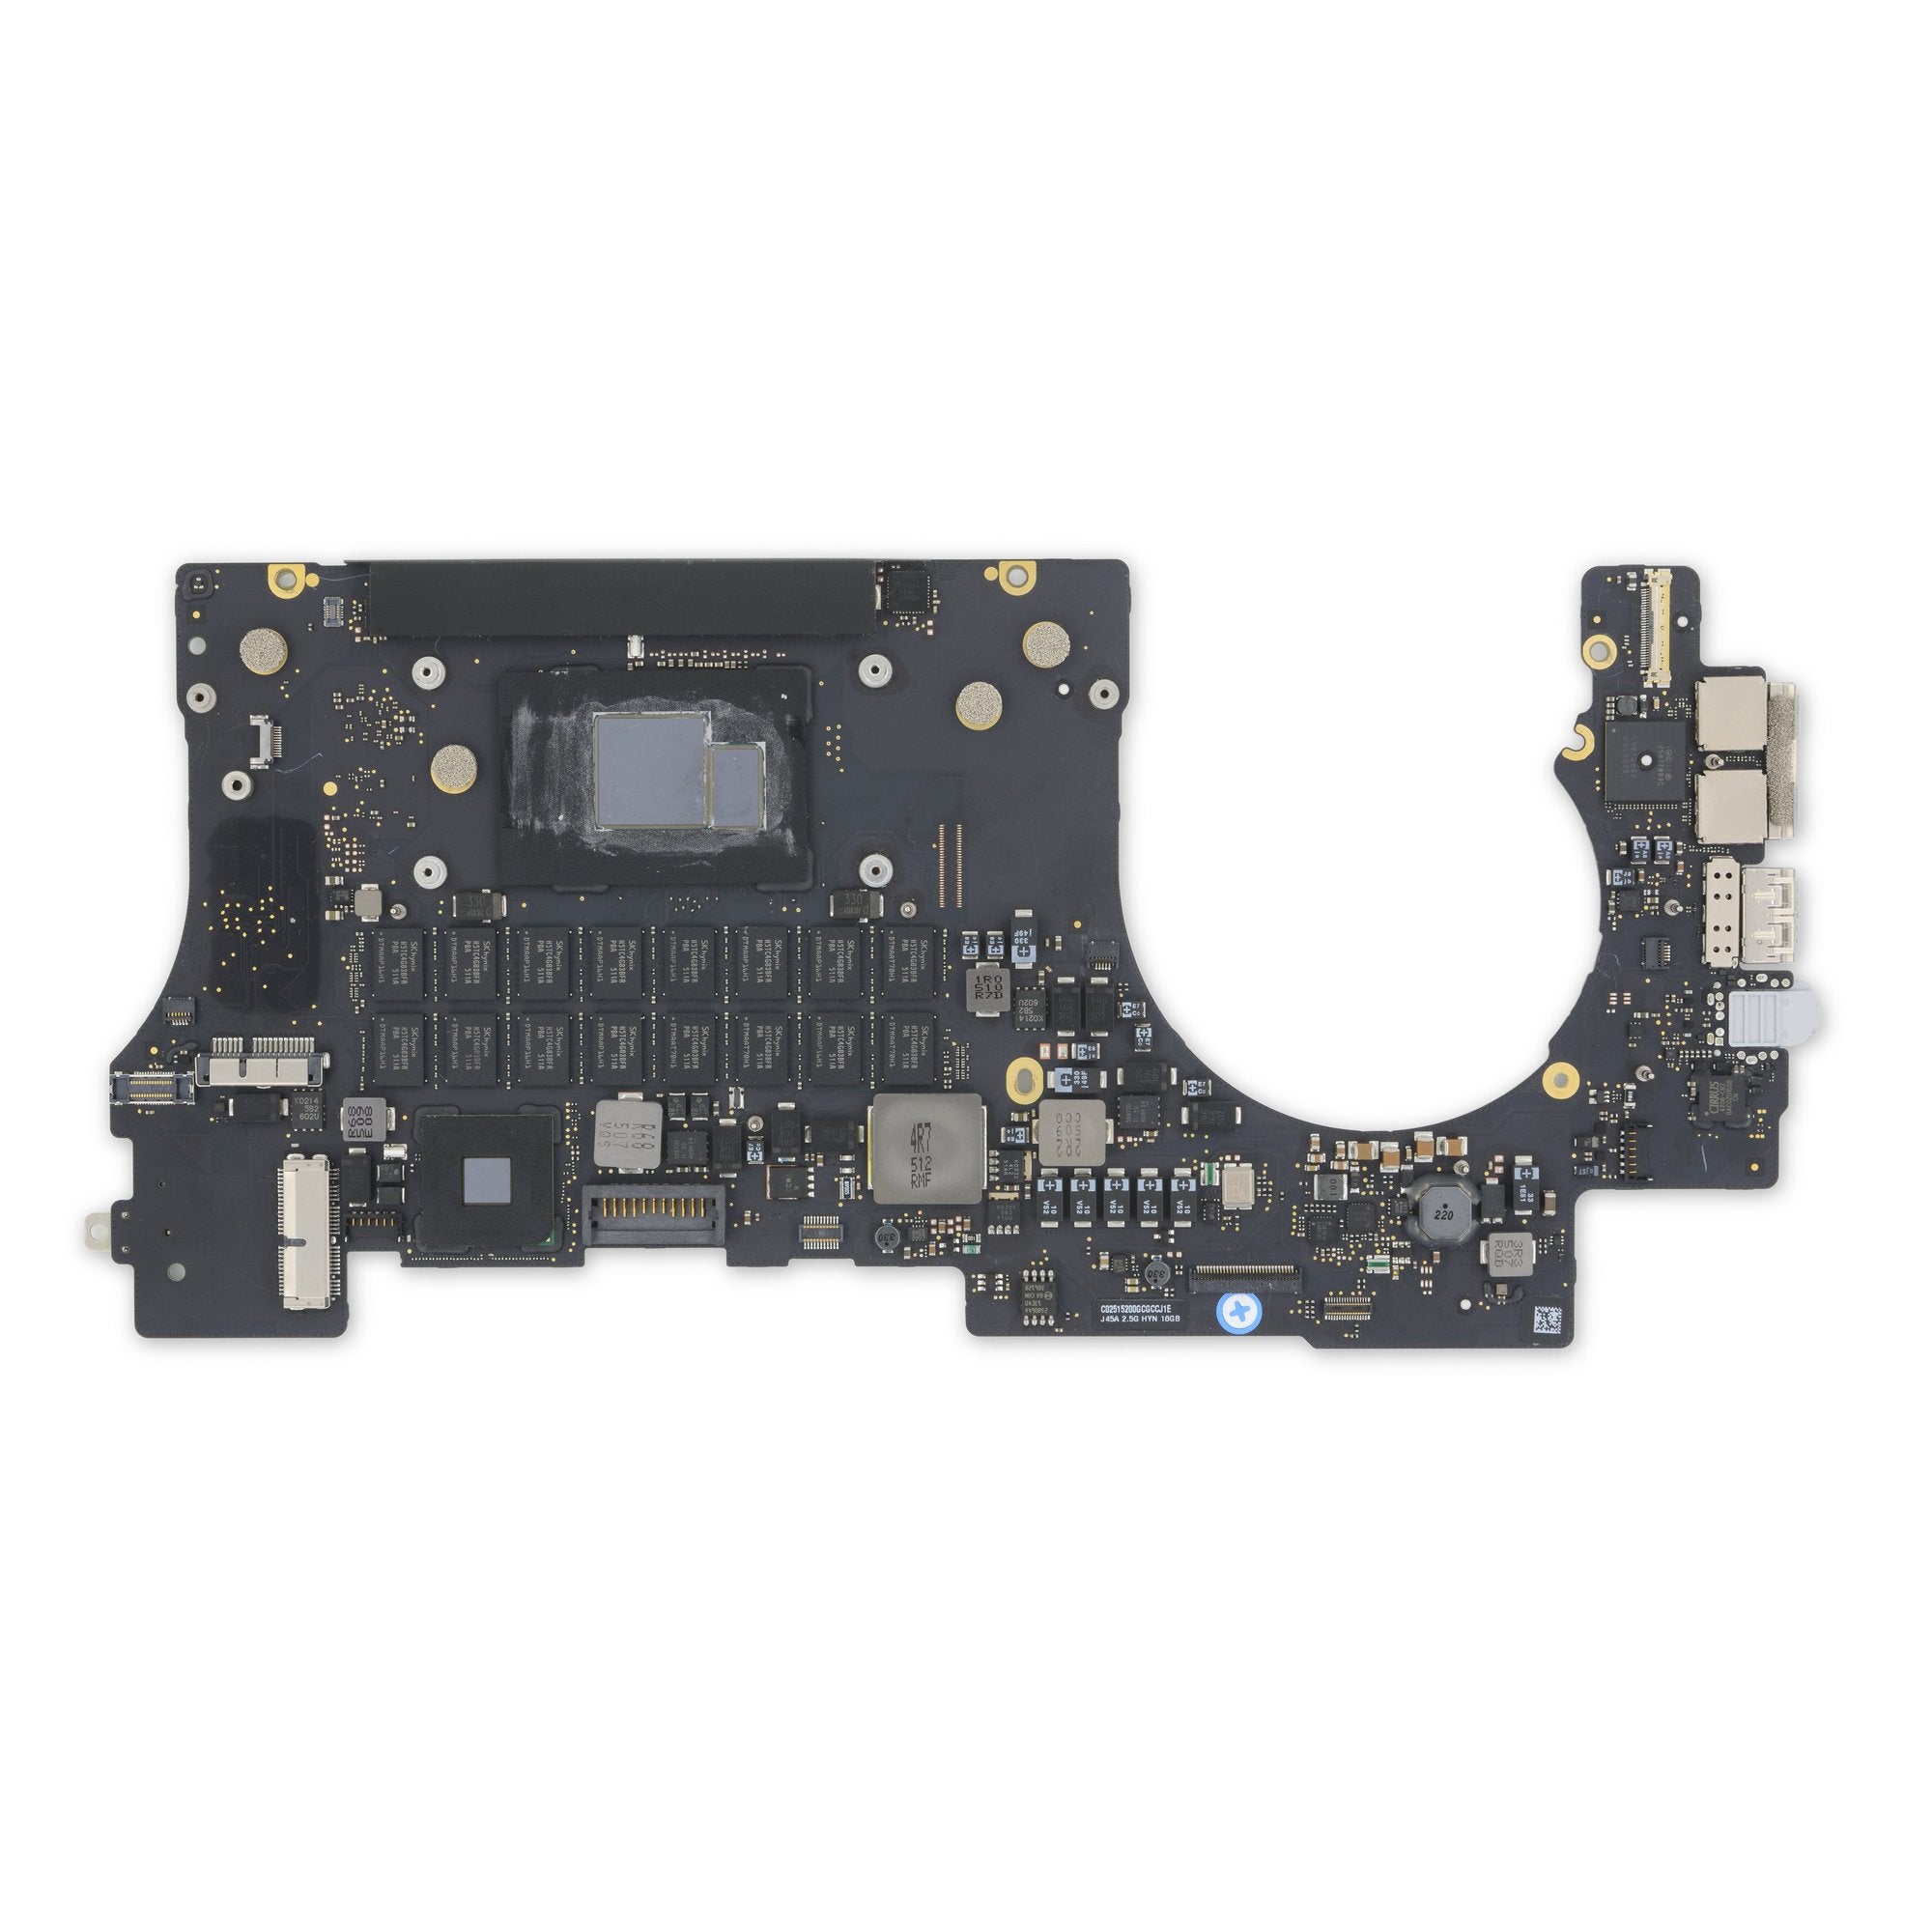 MacBook Pro 15" Retina (Mid 2014, Integrated Graphics) 2.5 GHz Logic Board Used